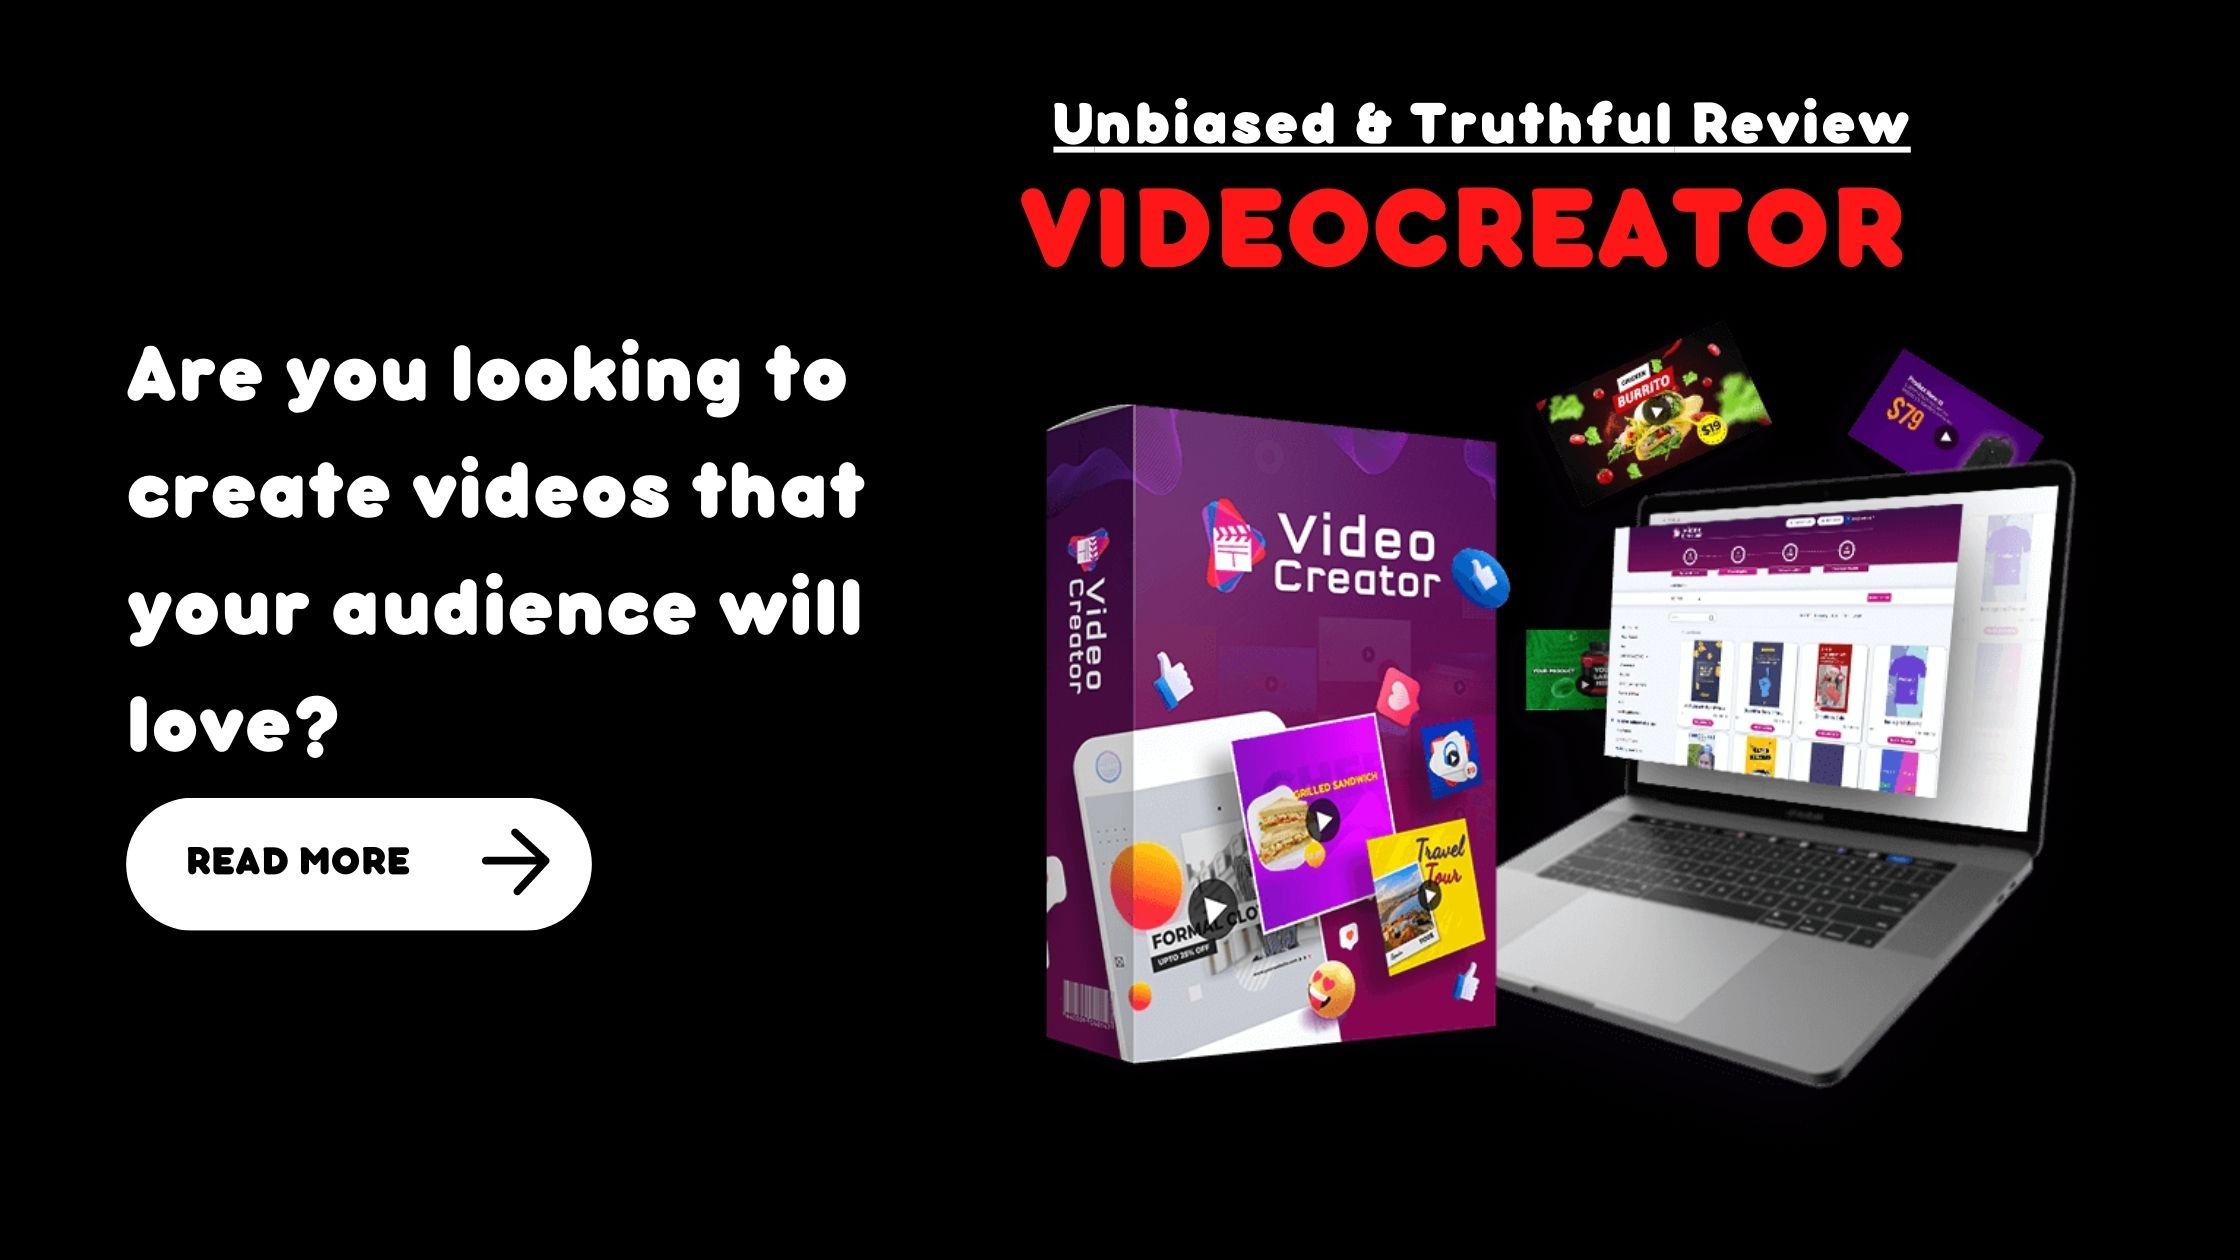 VideoCreator Review: Benefits, Features, Price, Cons, Alternatives